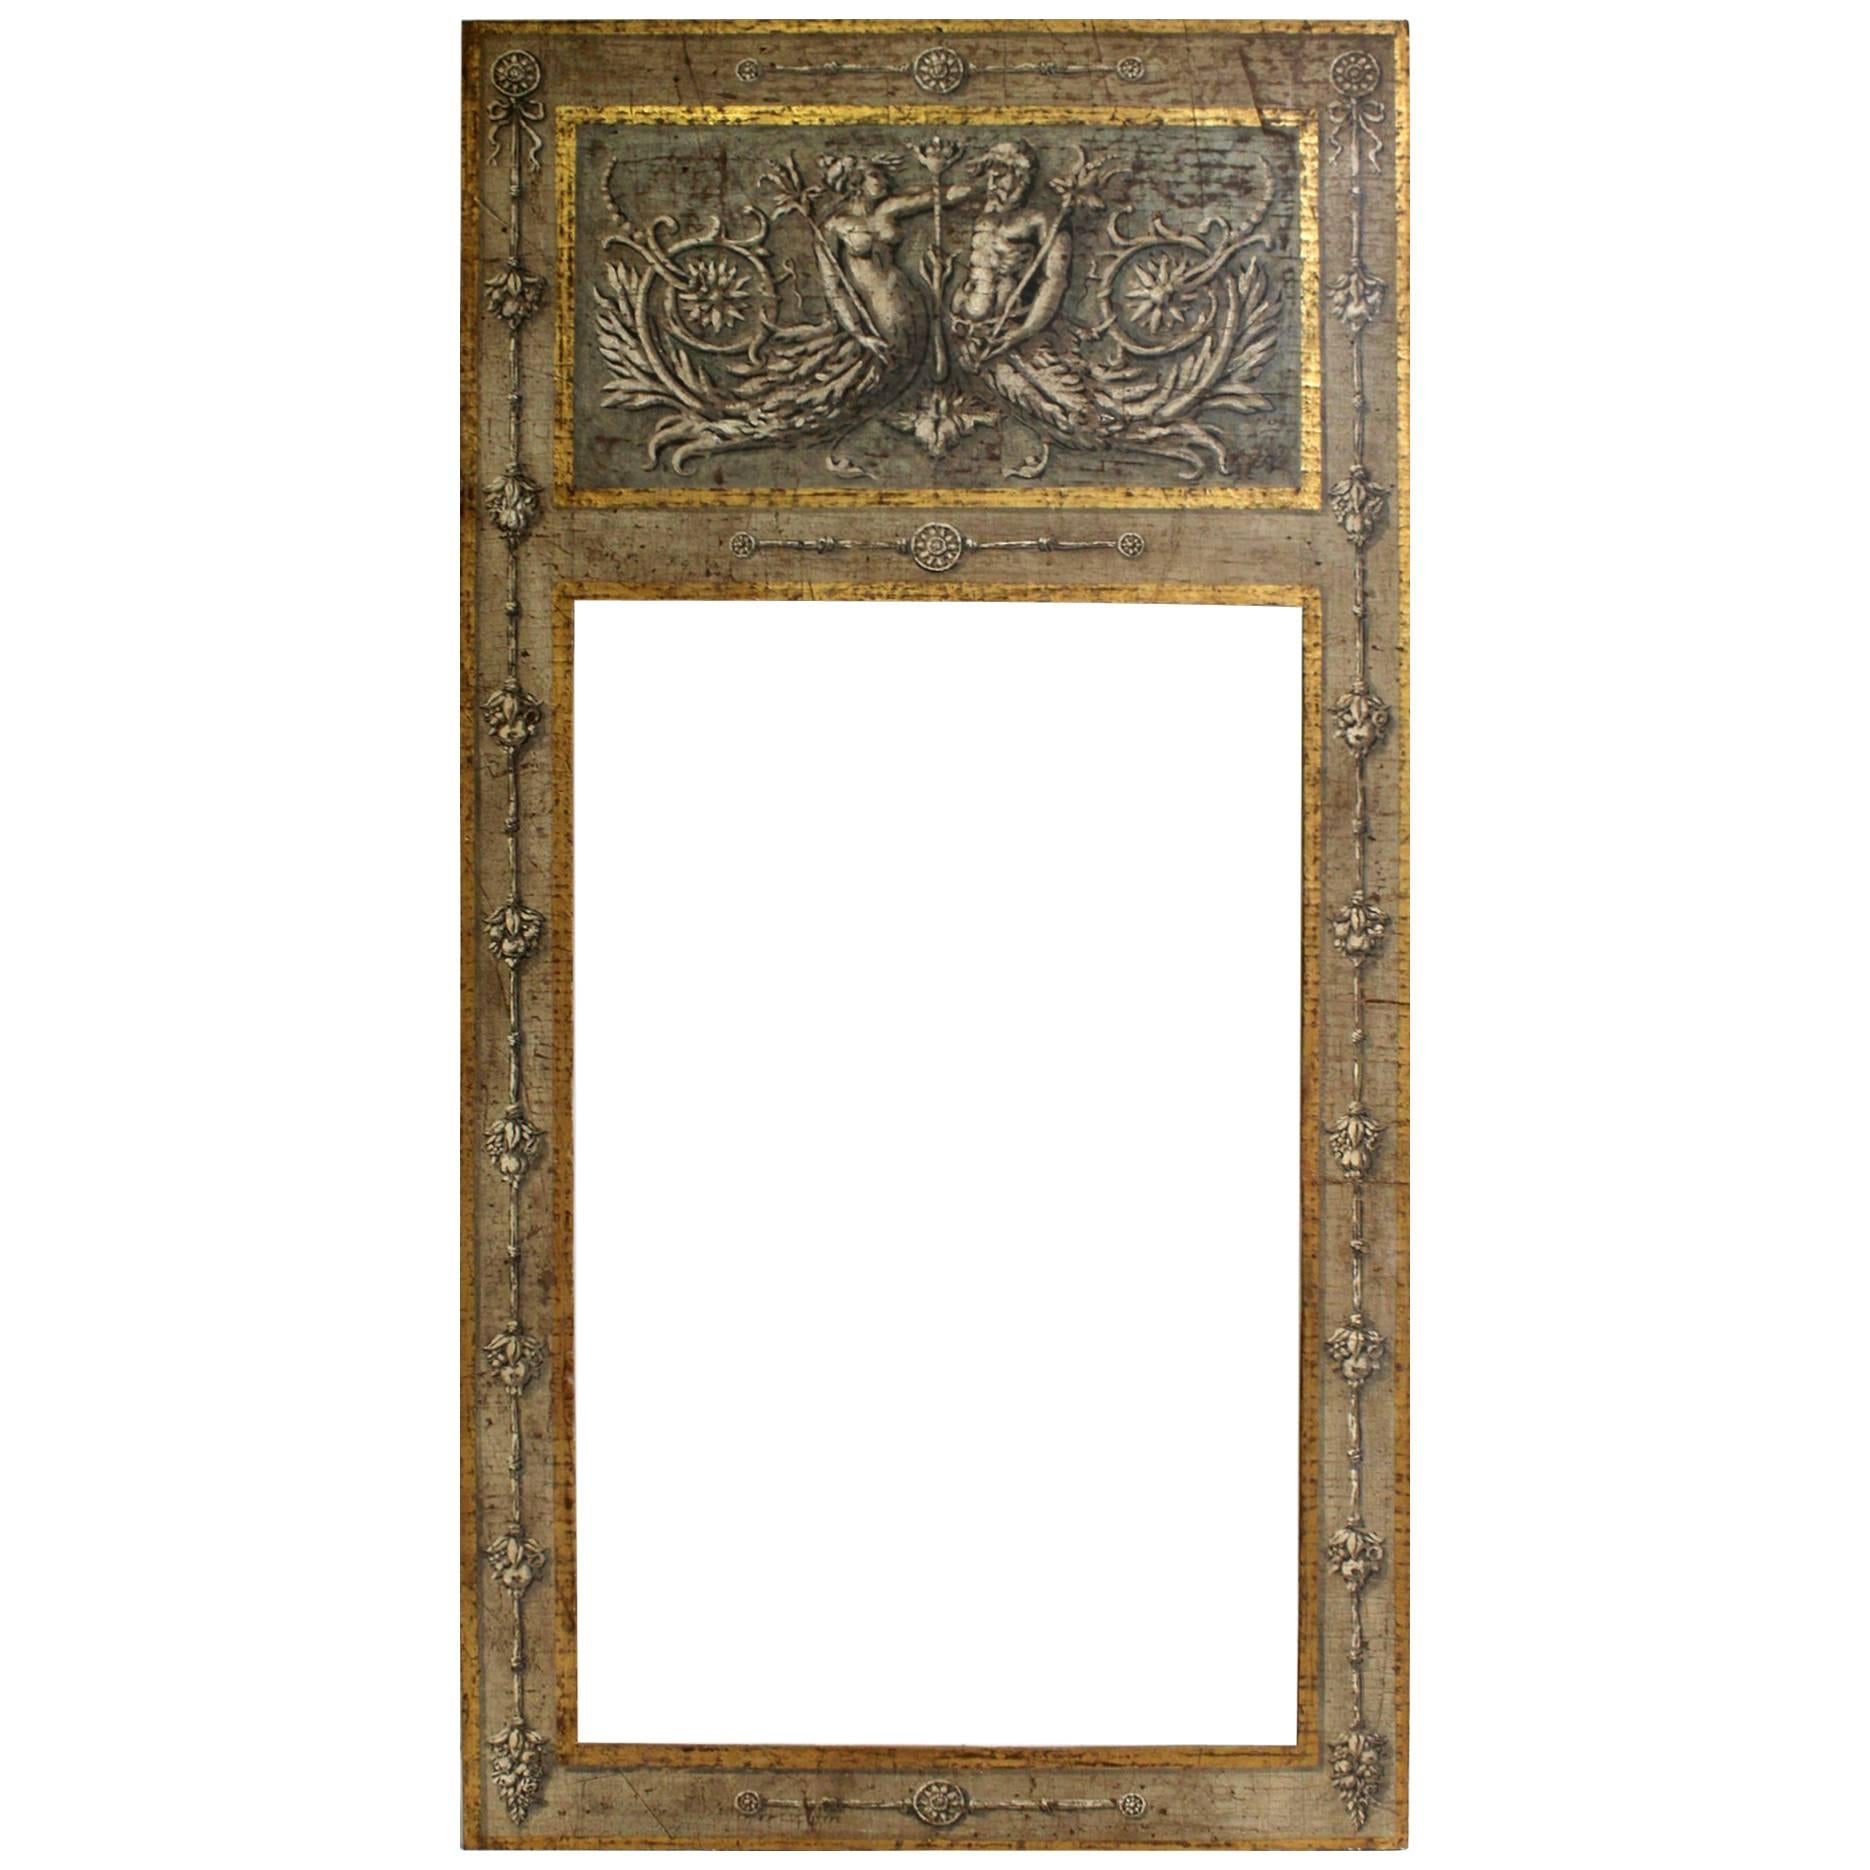 Large Antiqued Hand-Painted and Gilded Neoclassical Trumeau Mirror Frame in Gray